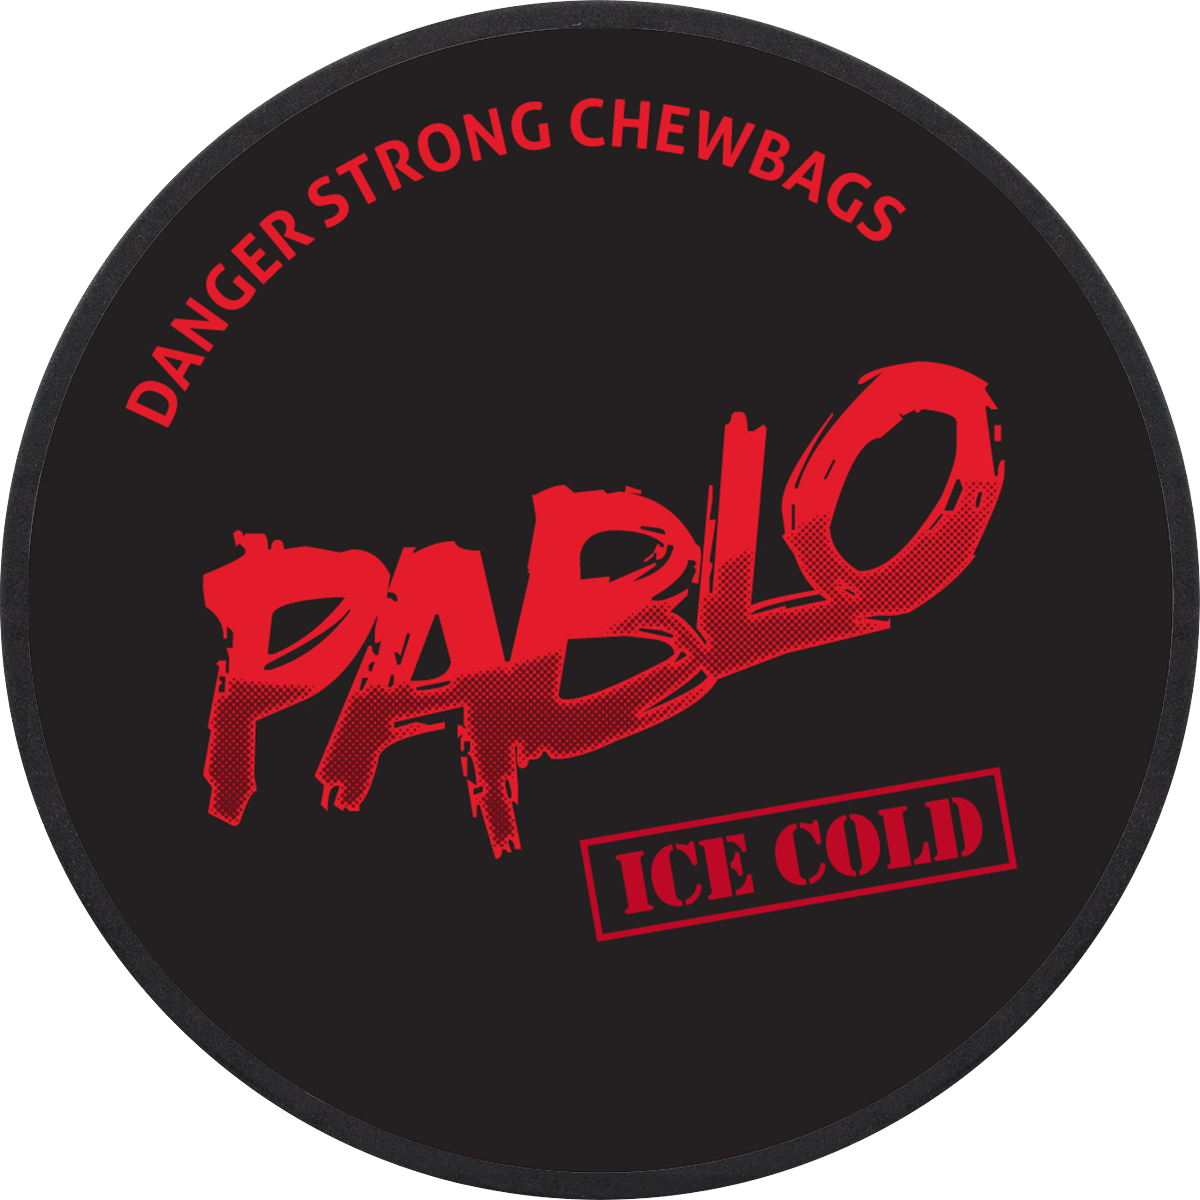 Pablo Ice Cold Chewbags 16g (Sweden bottom label)image